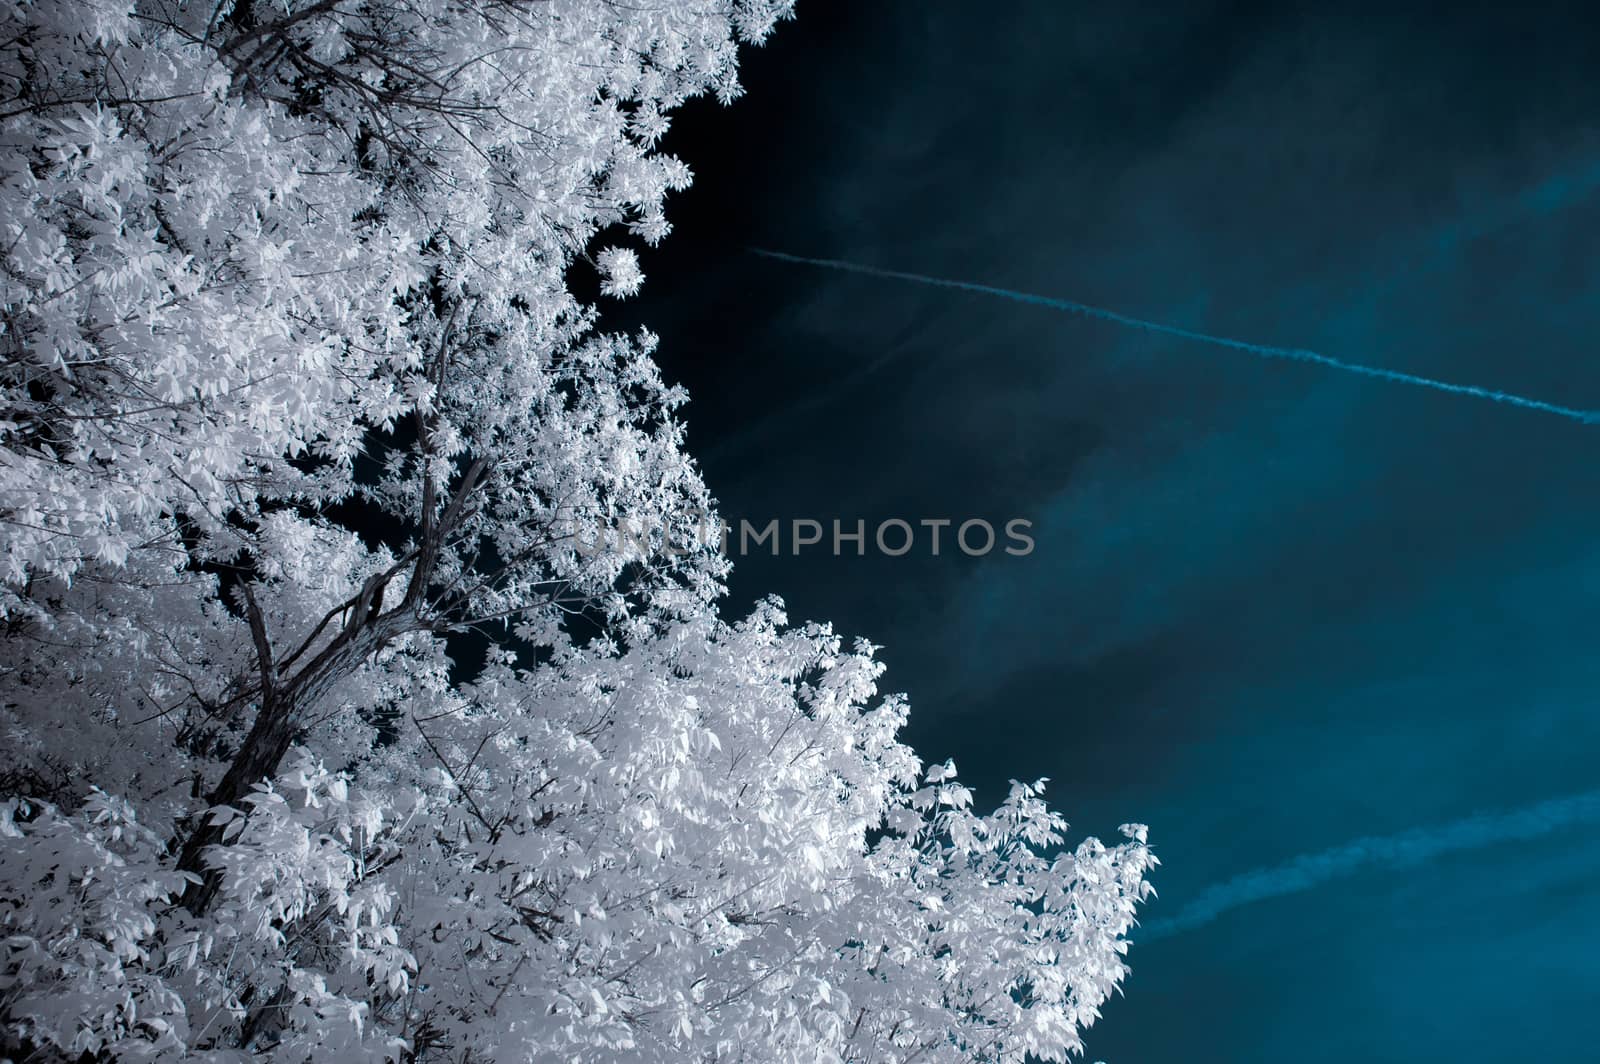 Infrared Landscape with White trees and Water by snelsonc